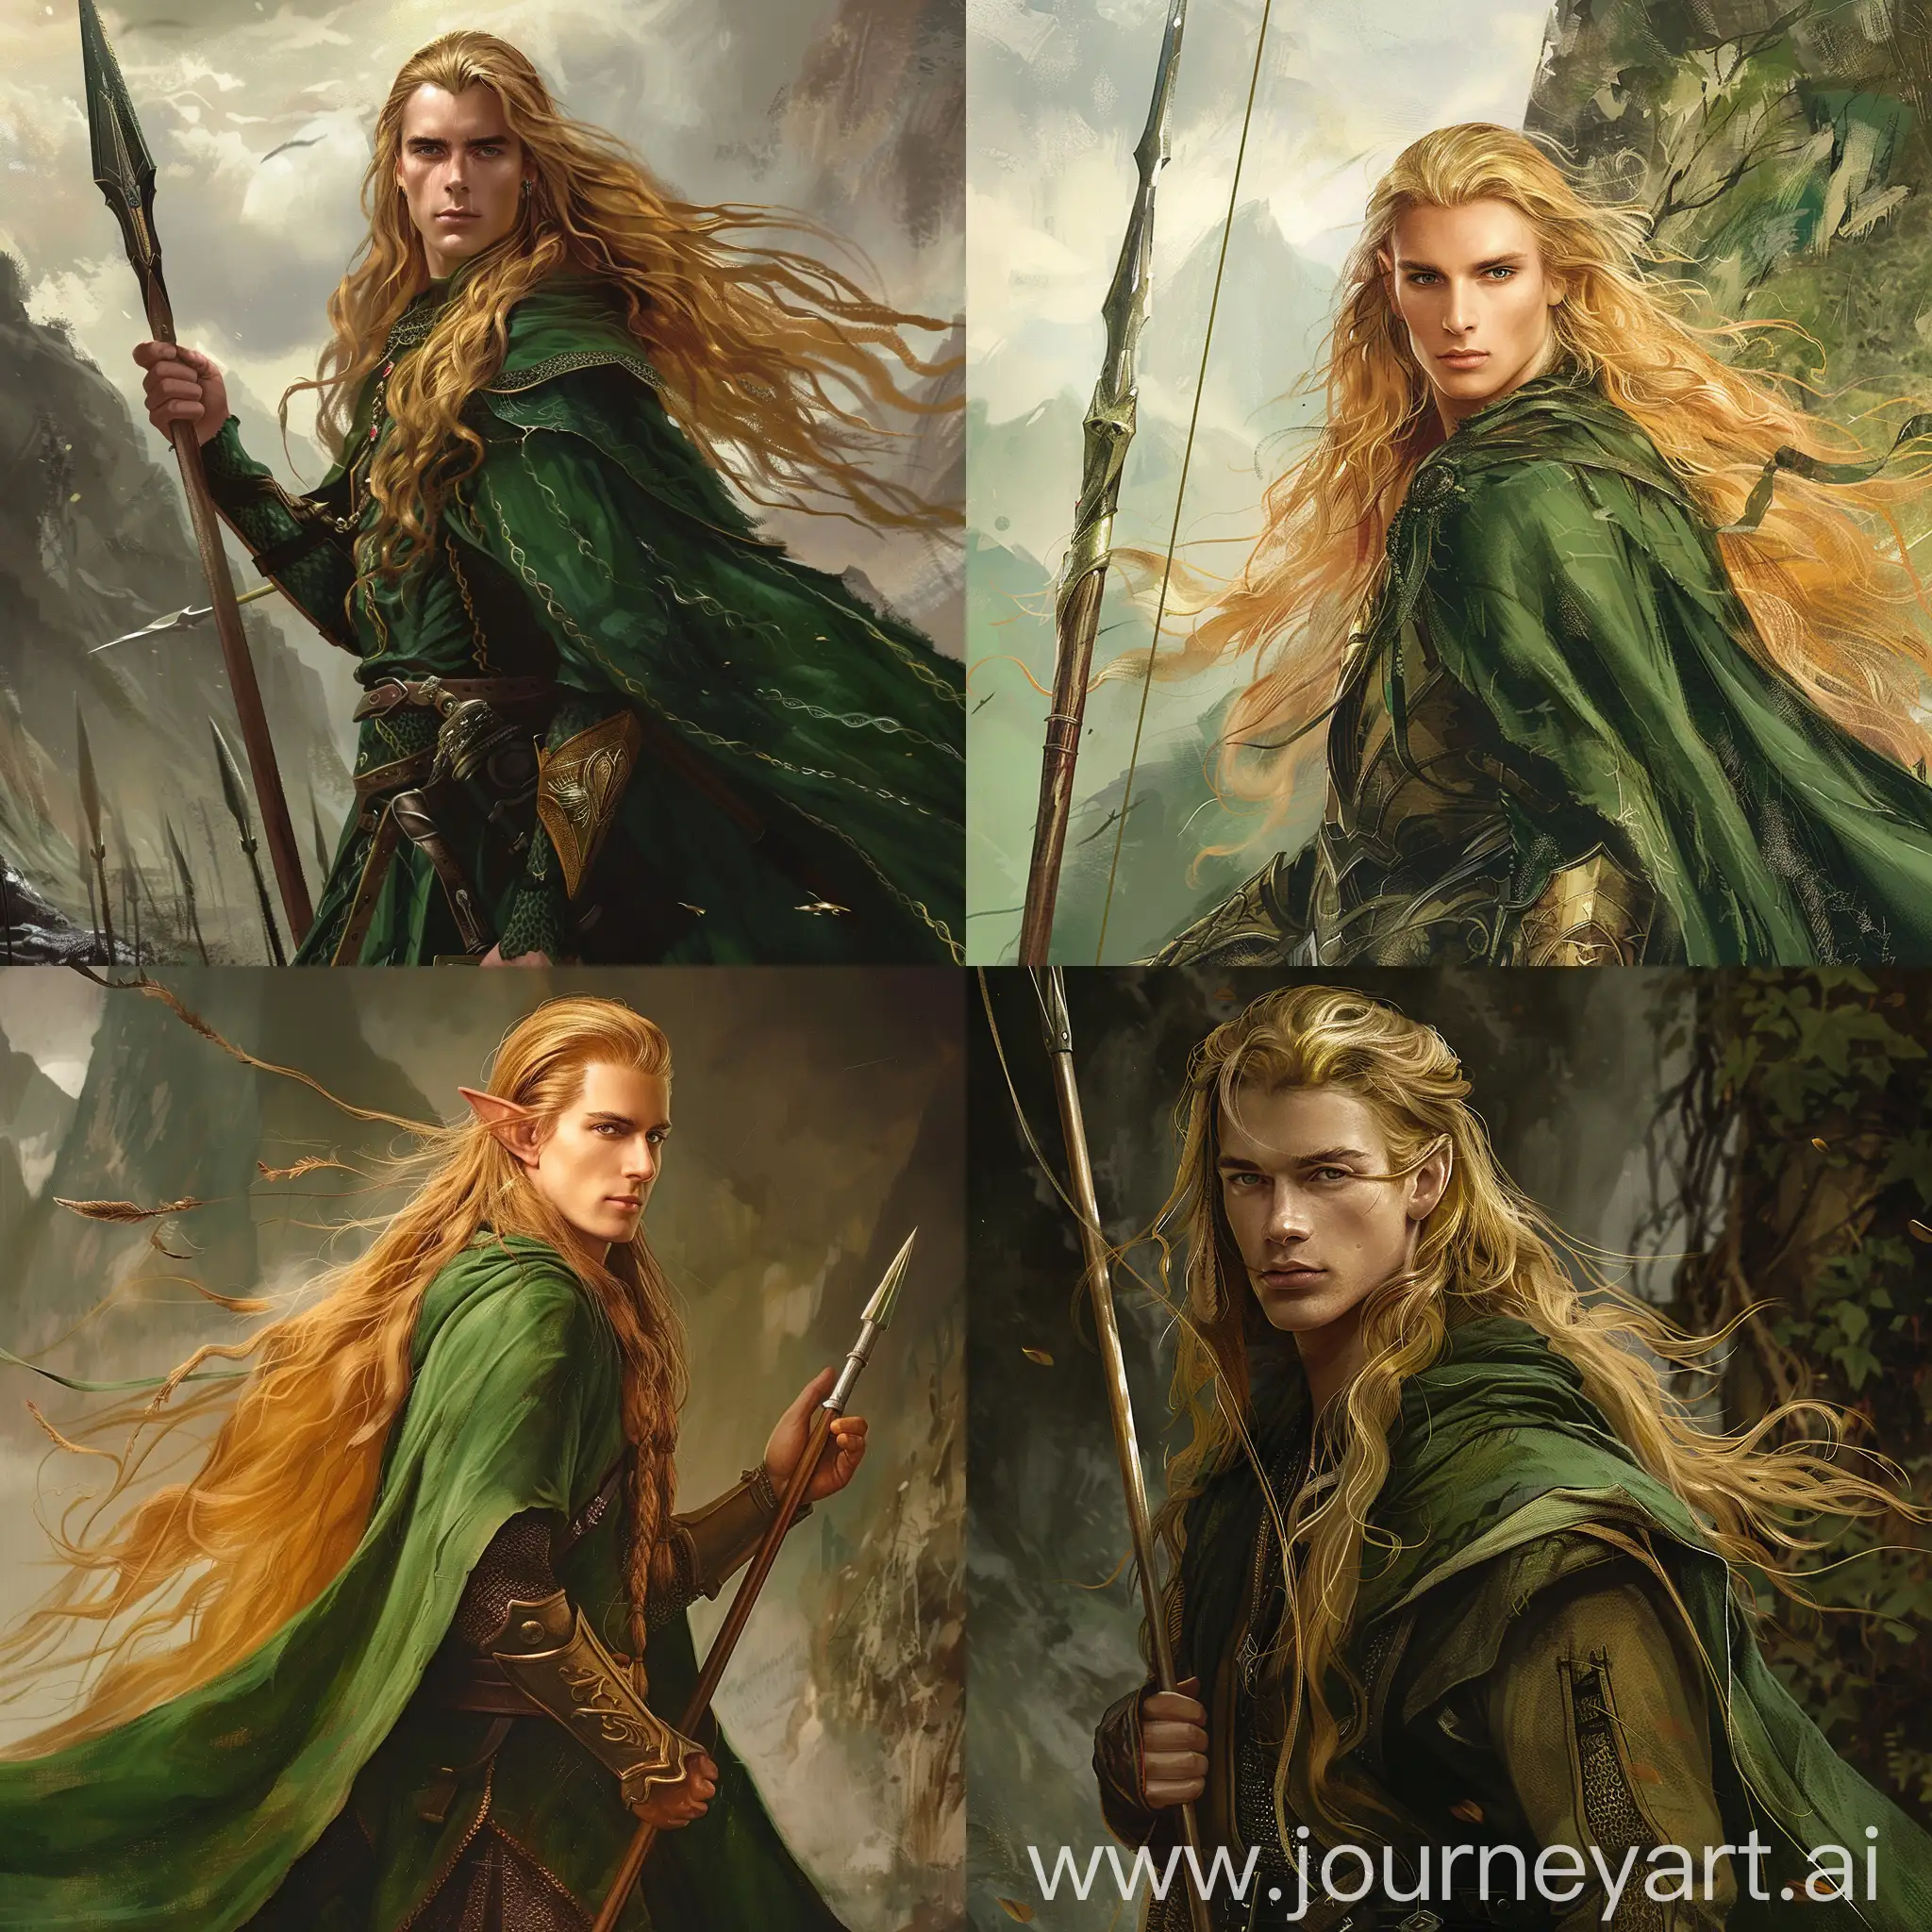 Gallant-Warrior-with-Golden-Hair-and-Spear-in-Lush-Greenery